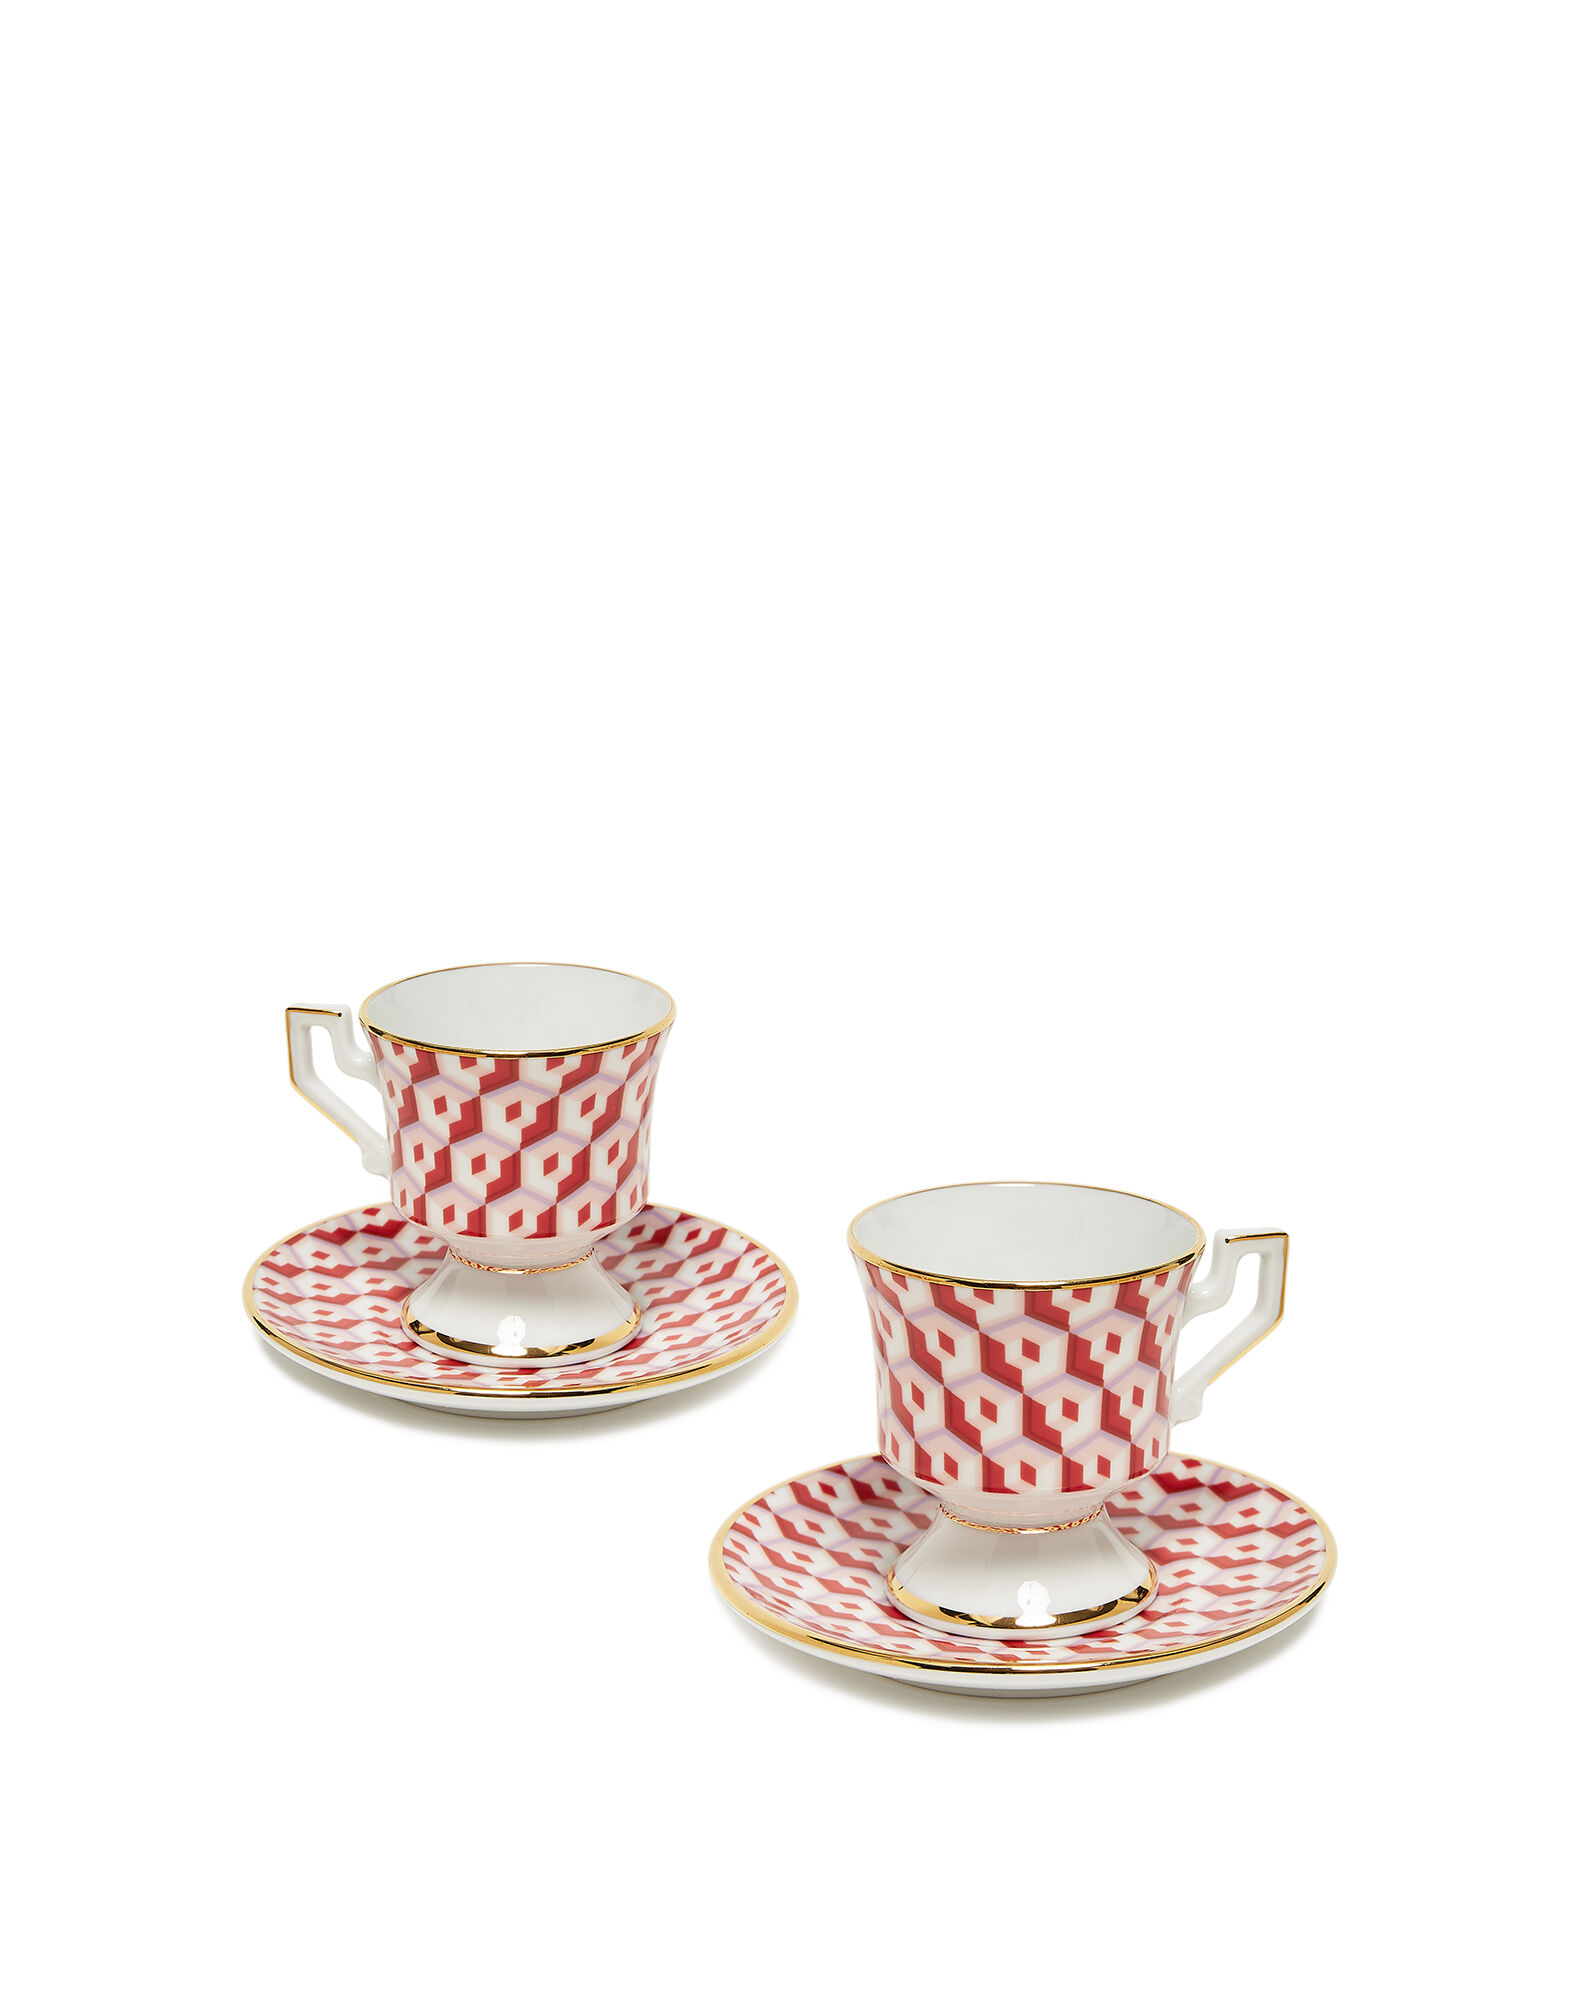 Rainbow set of 2 espresso cups and saucers in purple - La Double J